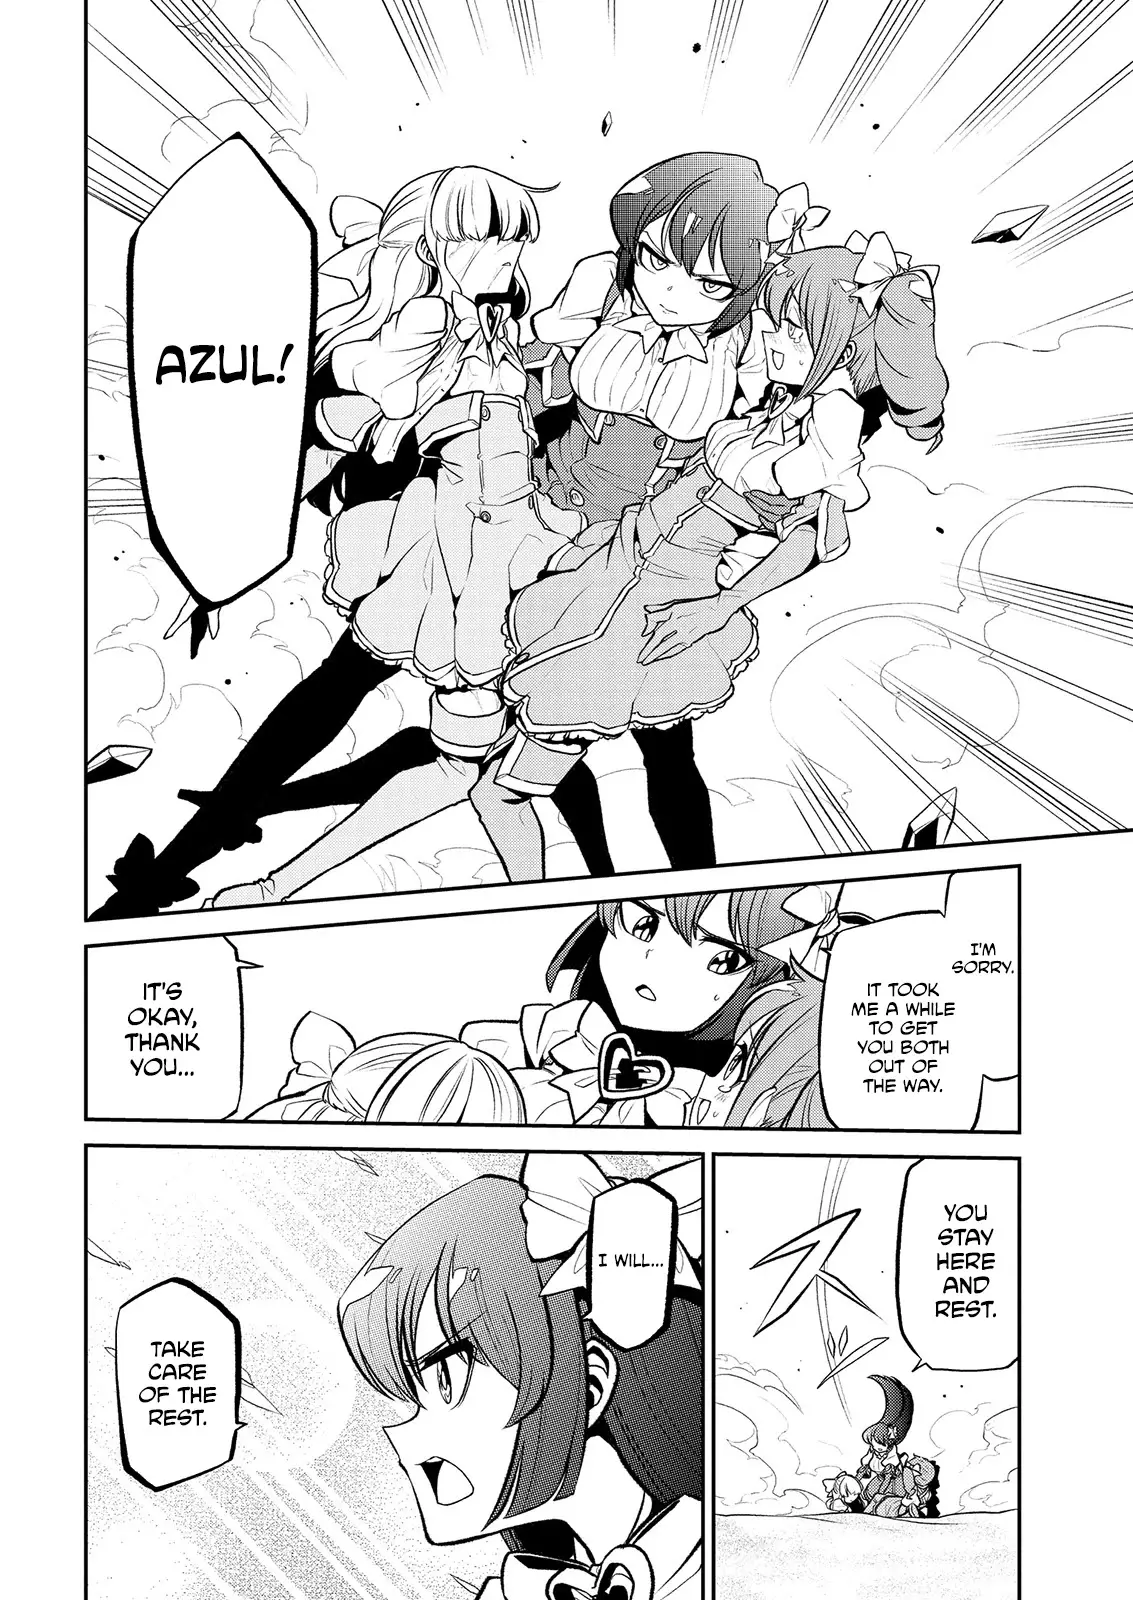 Looking Up To Magical Girls - 23 page 23